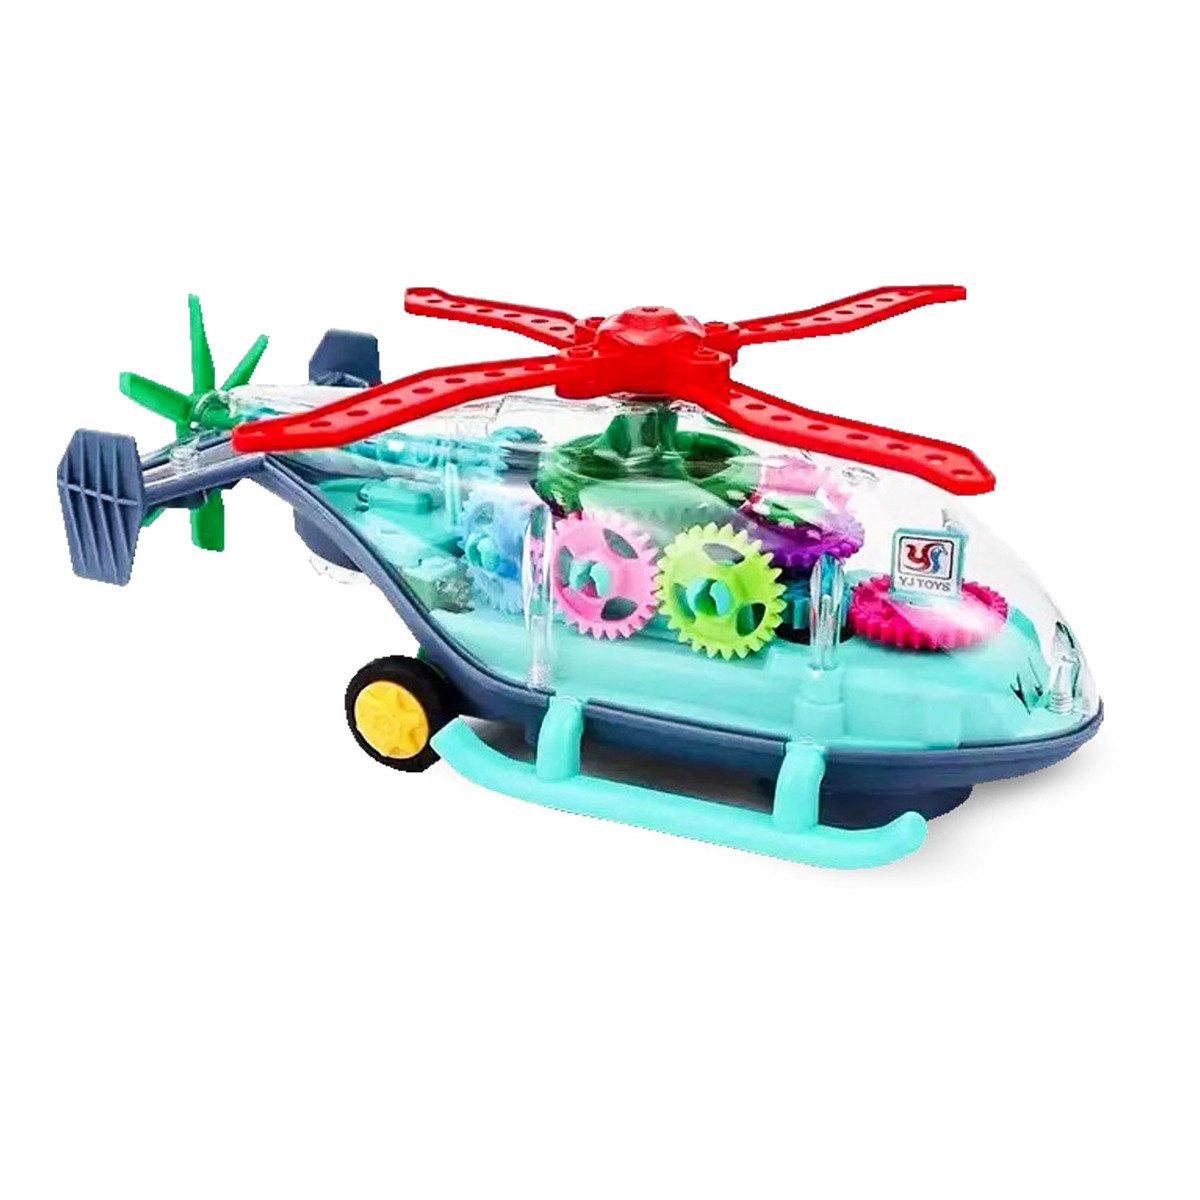 YJ Toys Battery Operated Helicopter YJ388-66